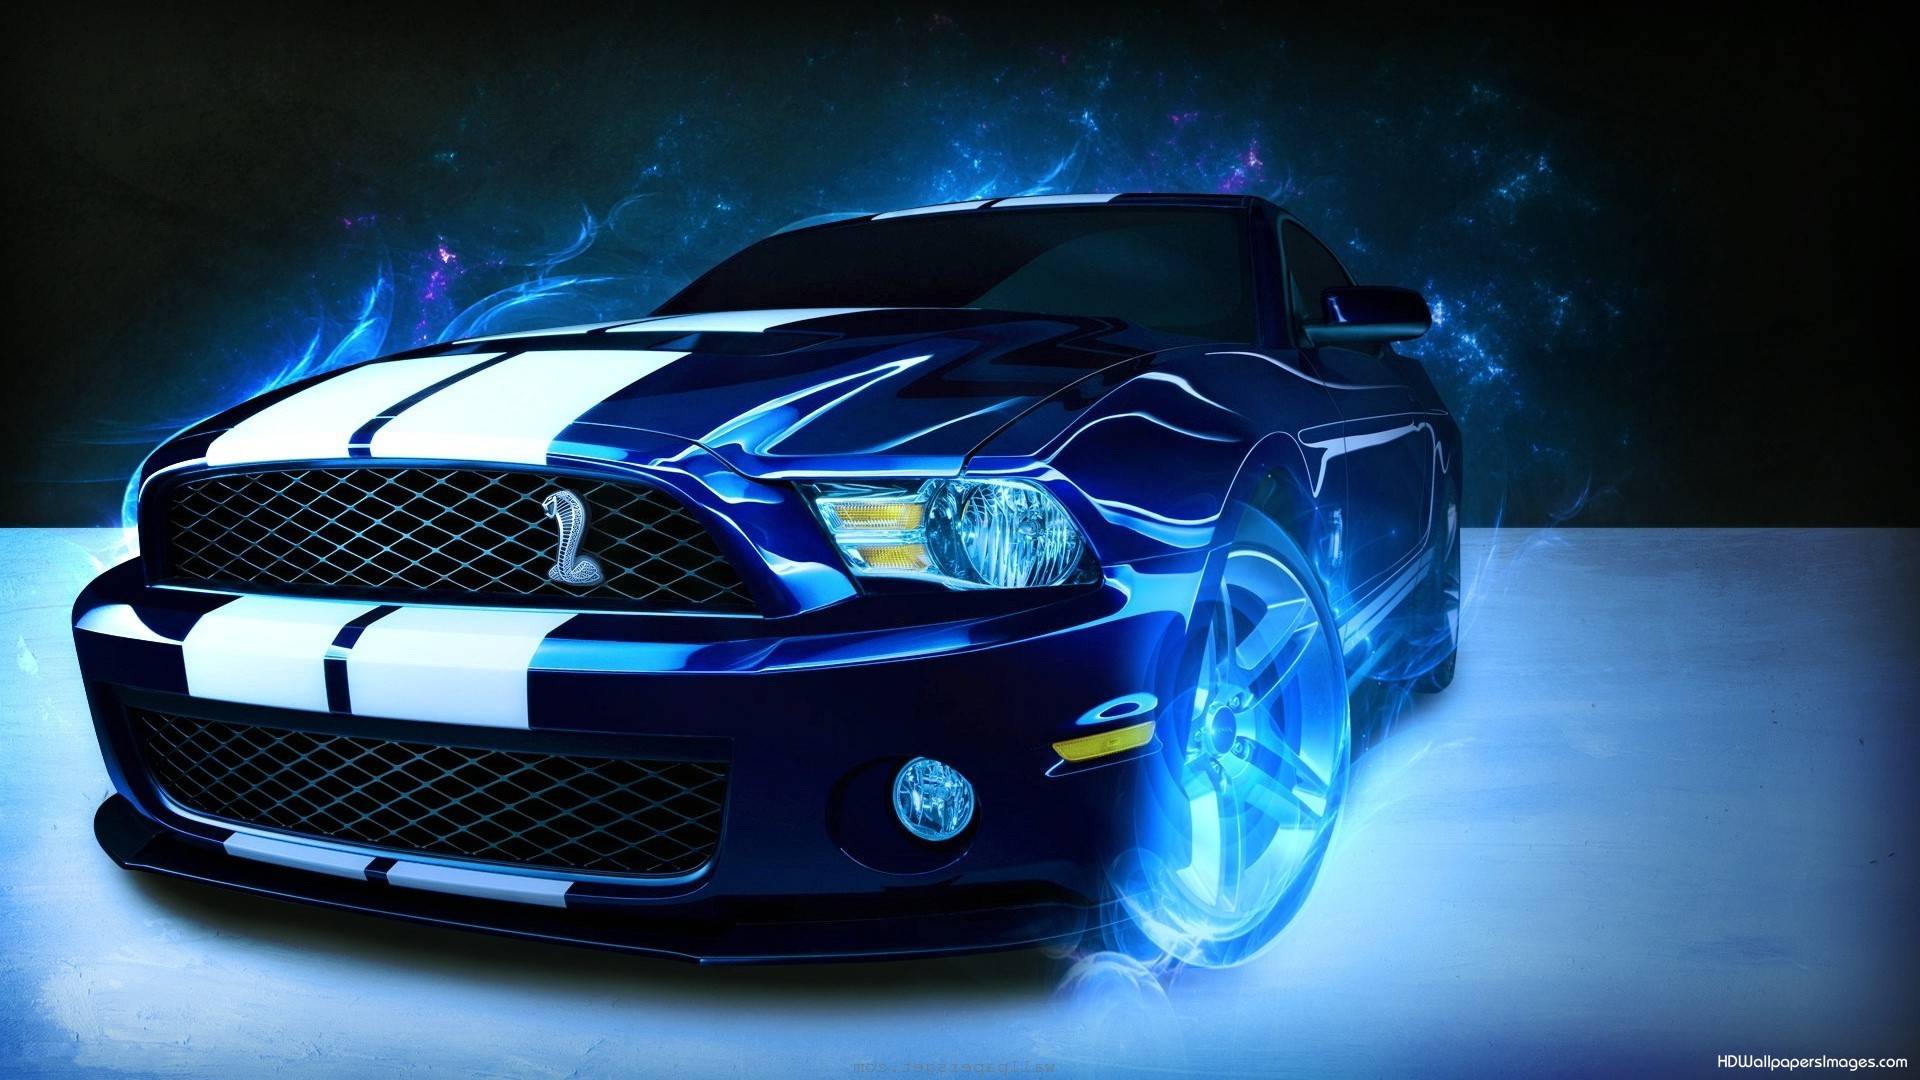 Free Download Ford Mustang Gt Wallpaper Ford Mustang Wallpaper Best Desktopbest 1920x1080 For Your Desktop Mobile Tablet Explore 49 Mustang Wallpaper For Computer Hd Mustang Wallpapers Shelby Mustang Wallpaper